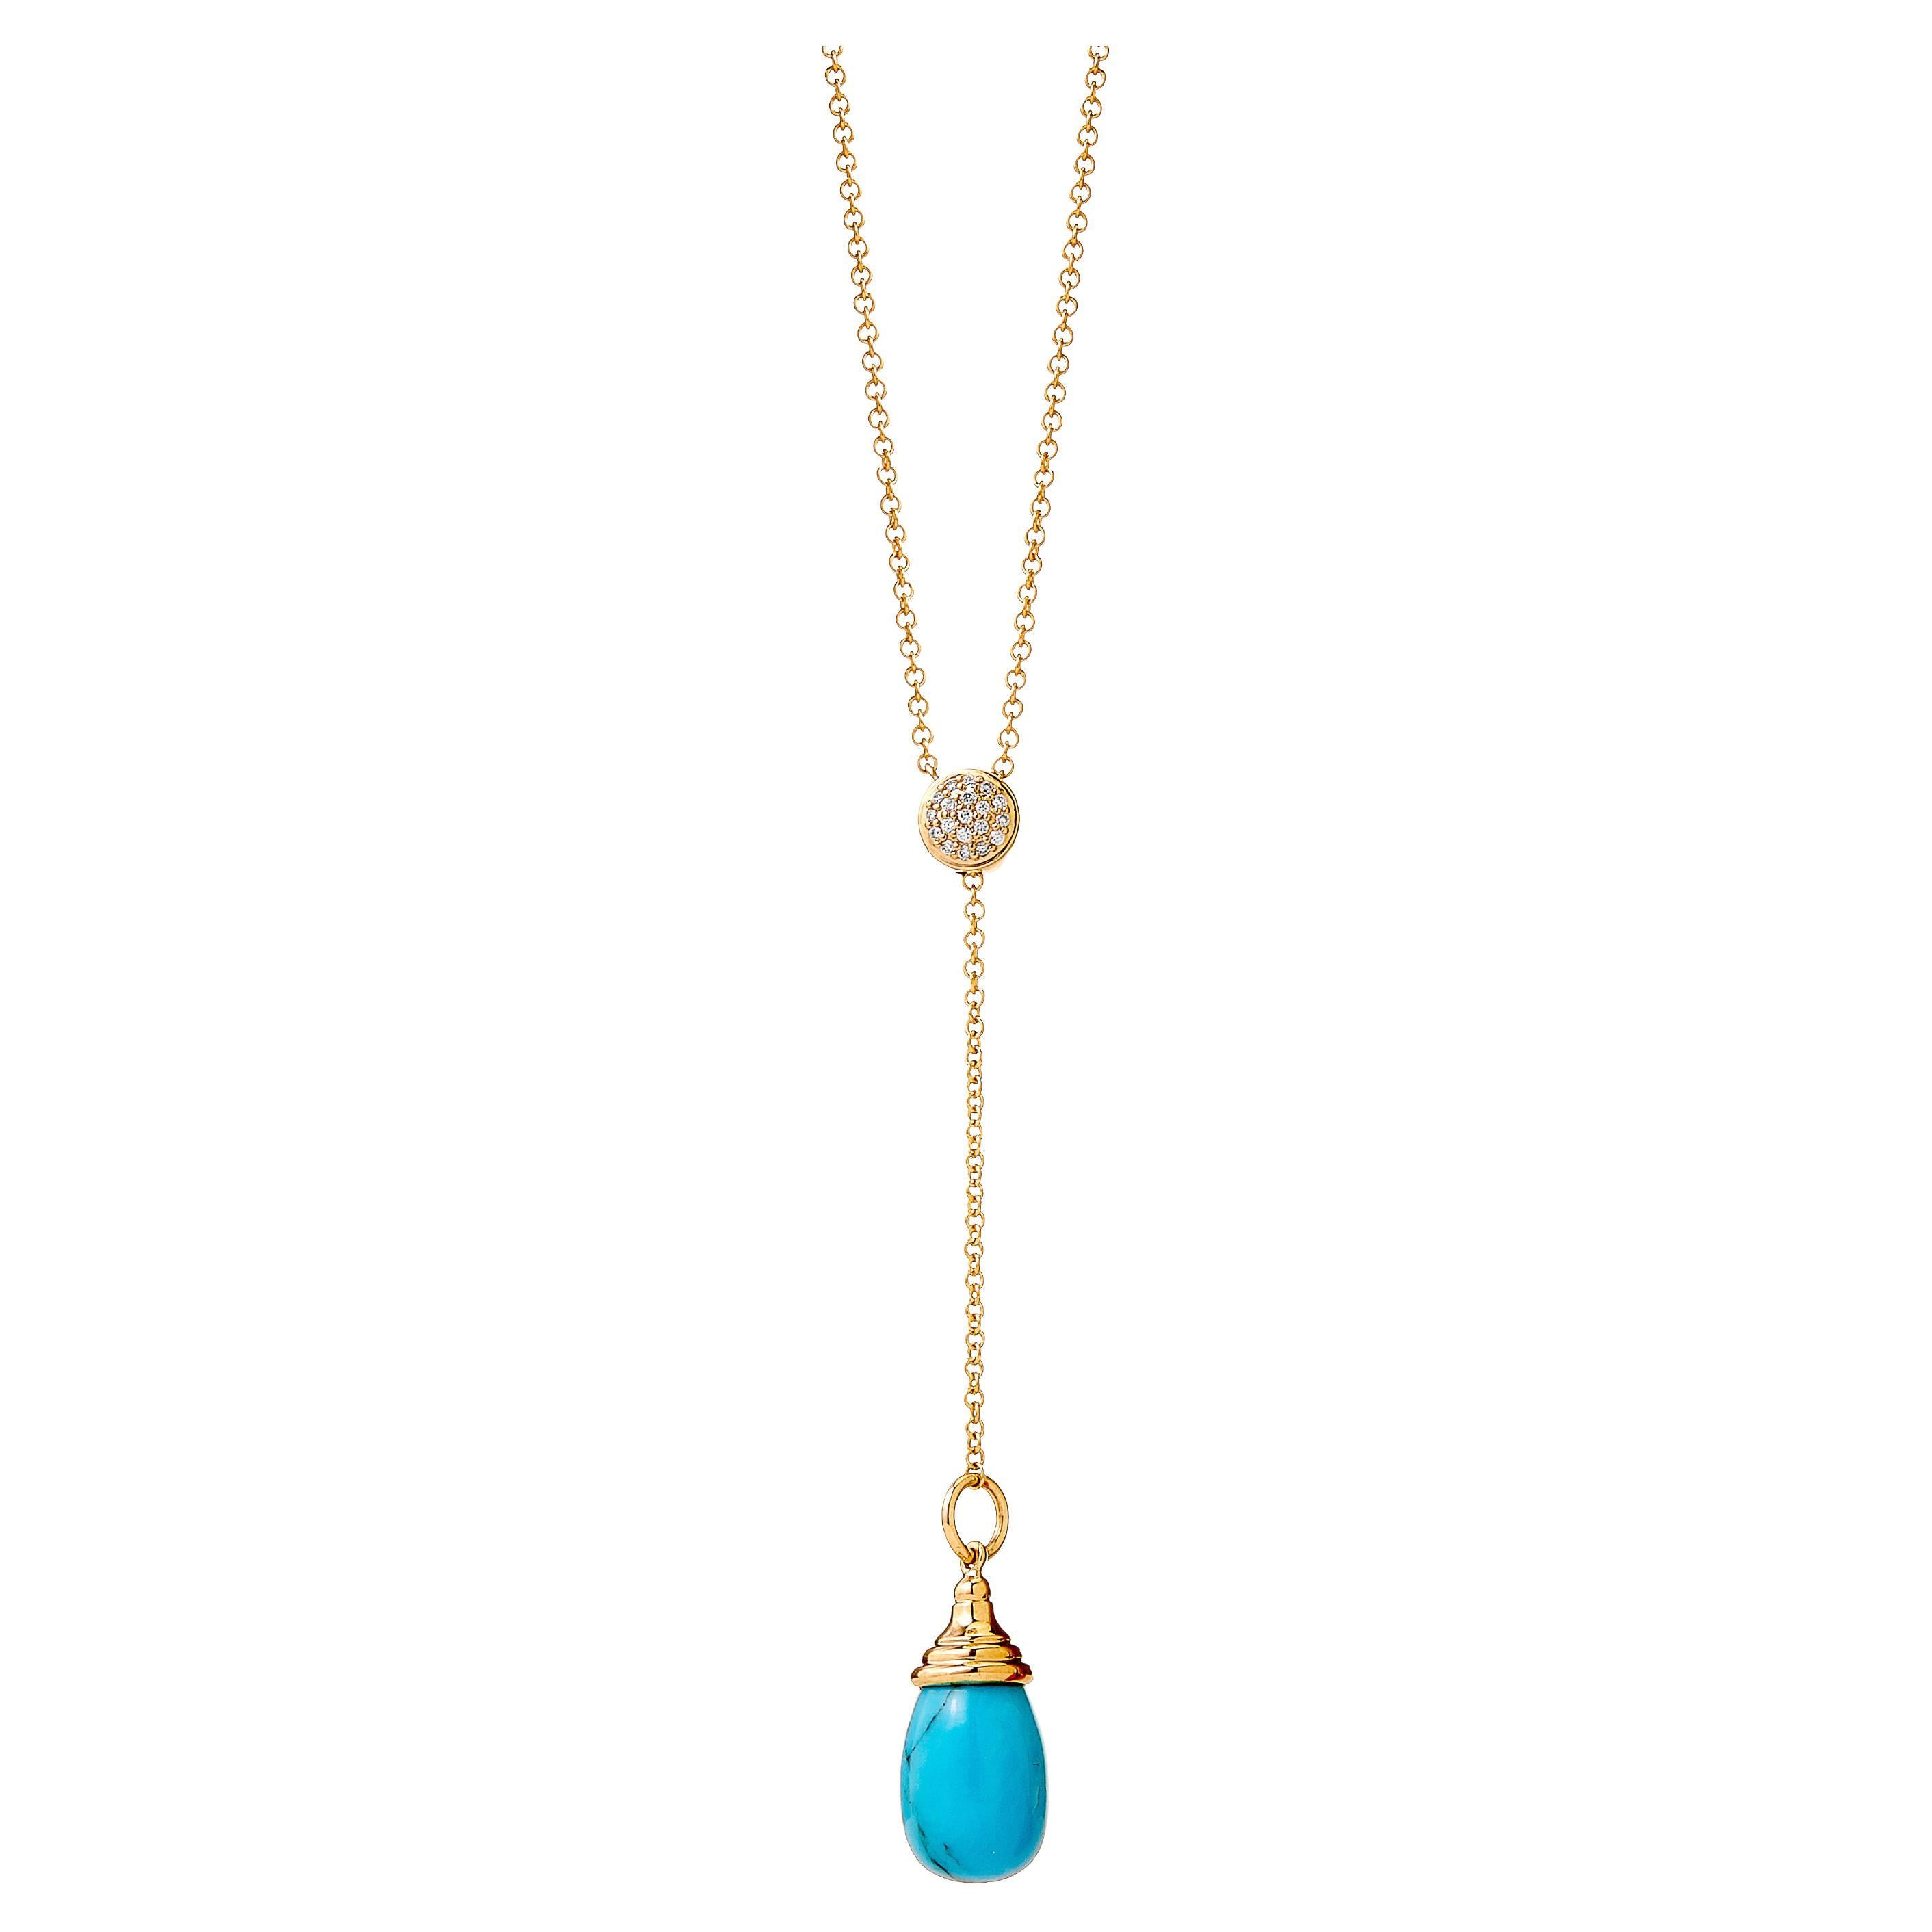 Syna Yellow Gold Sleeping Beauty Turquoise Necklace with Champagne Diamonds